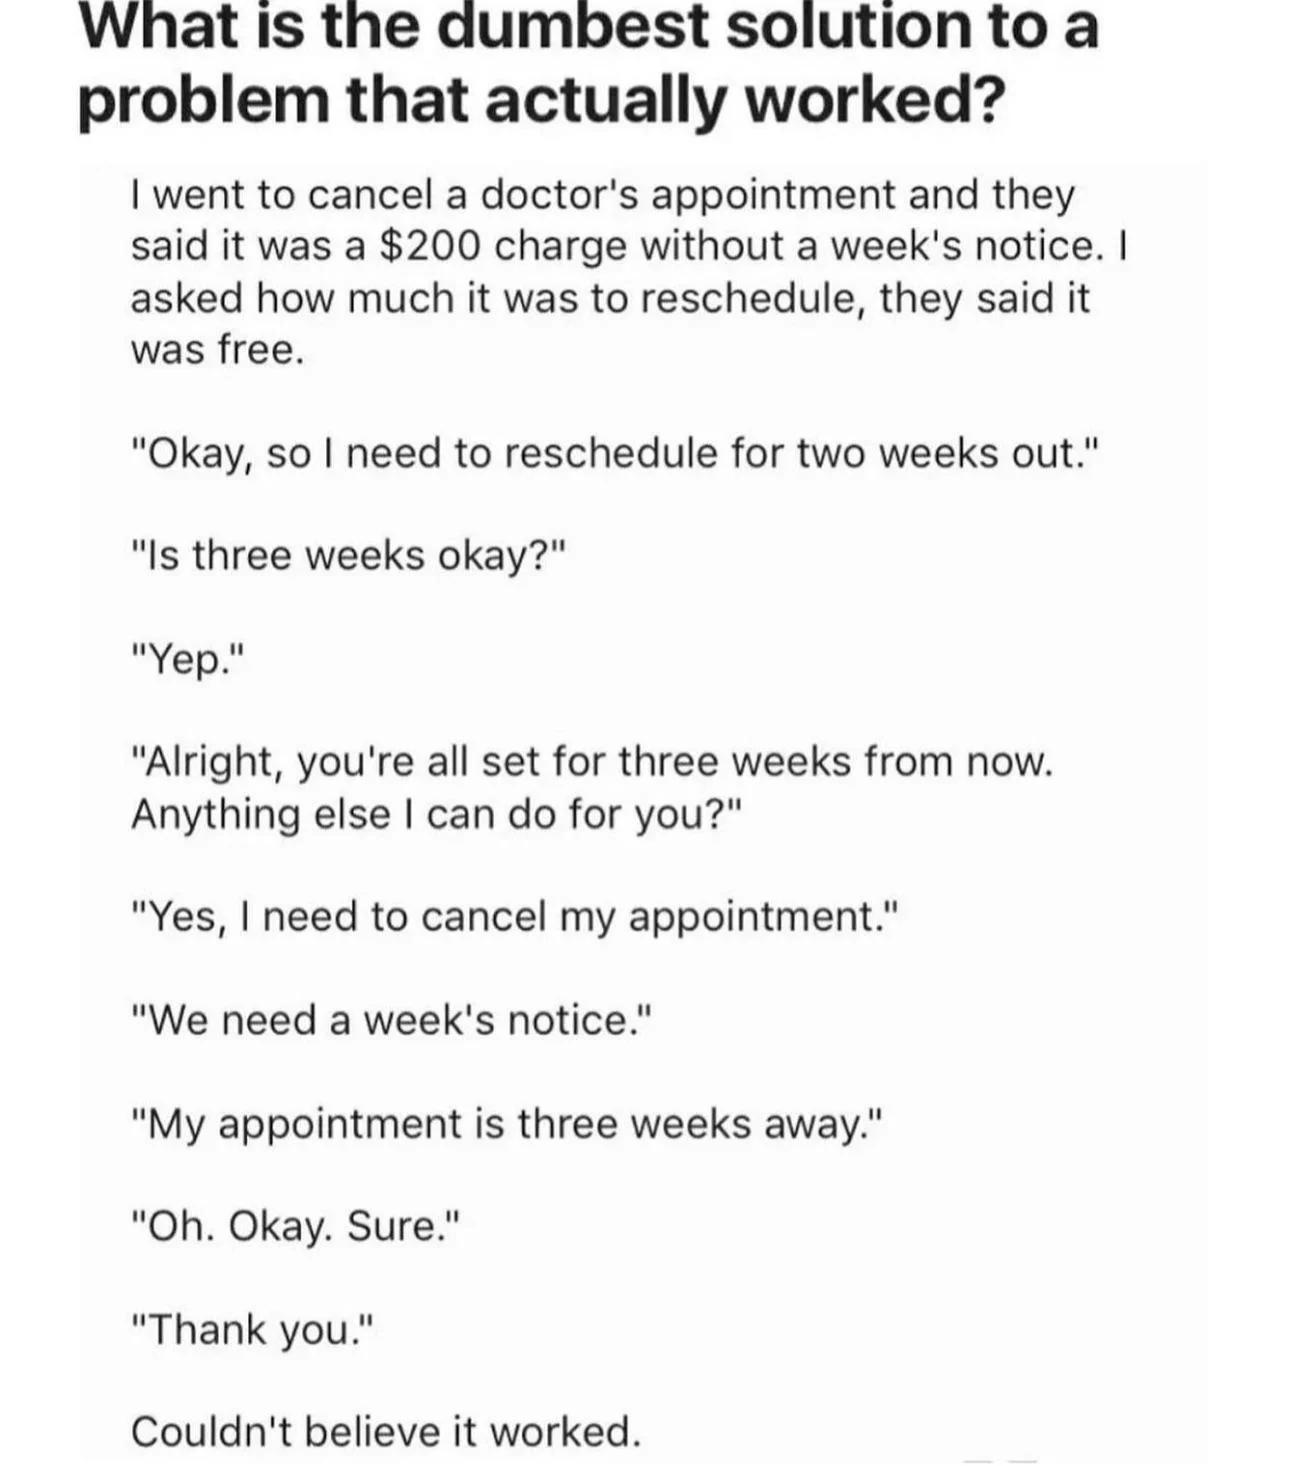 What is the dumbest solution to a problem that actually worked?

I went to cancel a doctor's appointment and they said it was a $200 charge without a week's notice. I asked how much it was to reschedule, they said it was free.

"Okay, so I need to reschedule for two weeks out."

"Is three weeks okay?"

"Yep."

"Alright, you're all set for three weeks from now. Anything else I can do for you?"

"Yes, O need to cancel my appointment." "We need a week's notice."

"My appointment is three weeks away." 

"Oh. Okay. Sure."

"Thank you."

Couldn't believe it worked. 